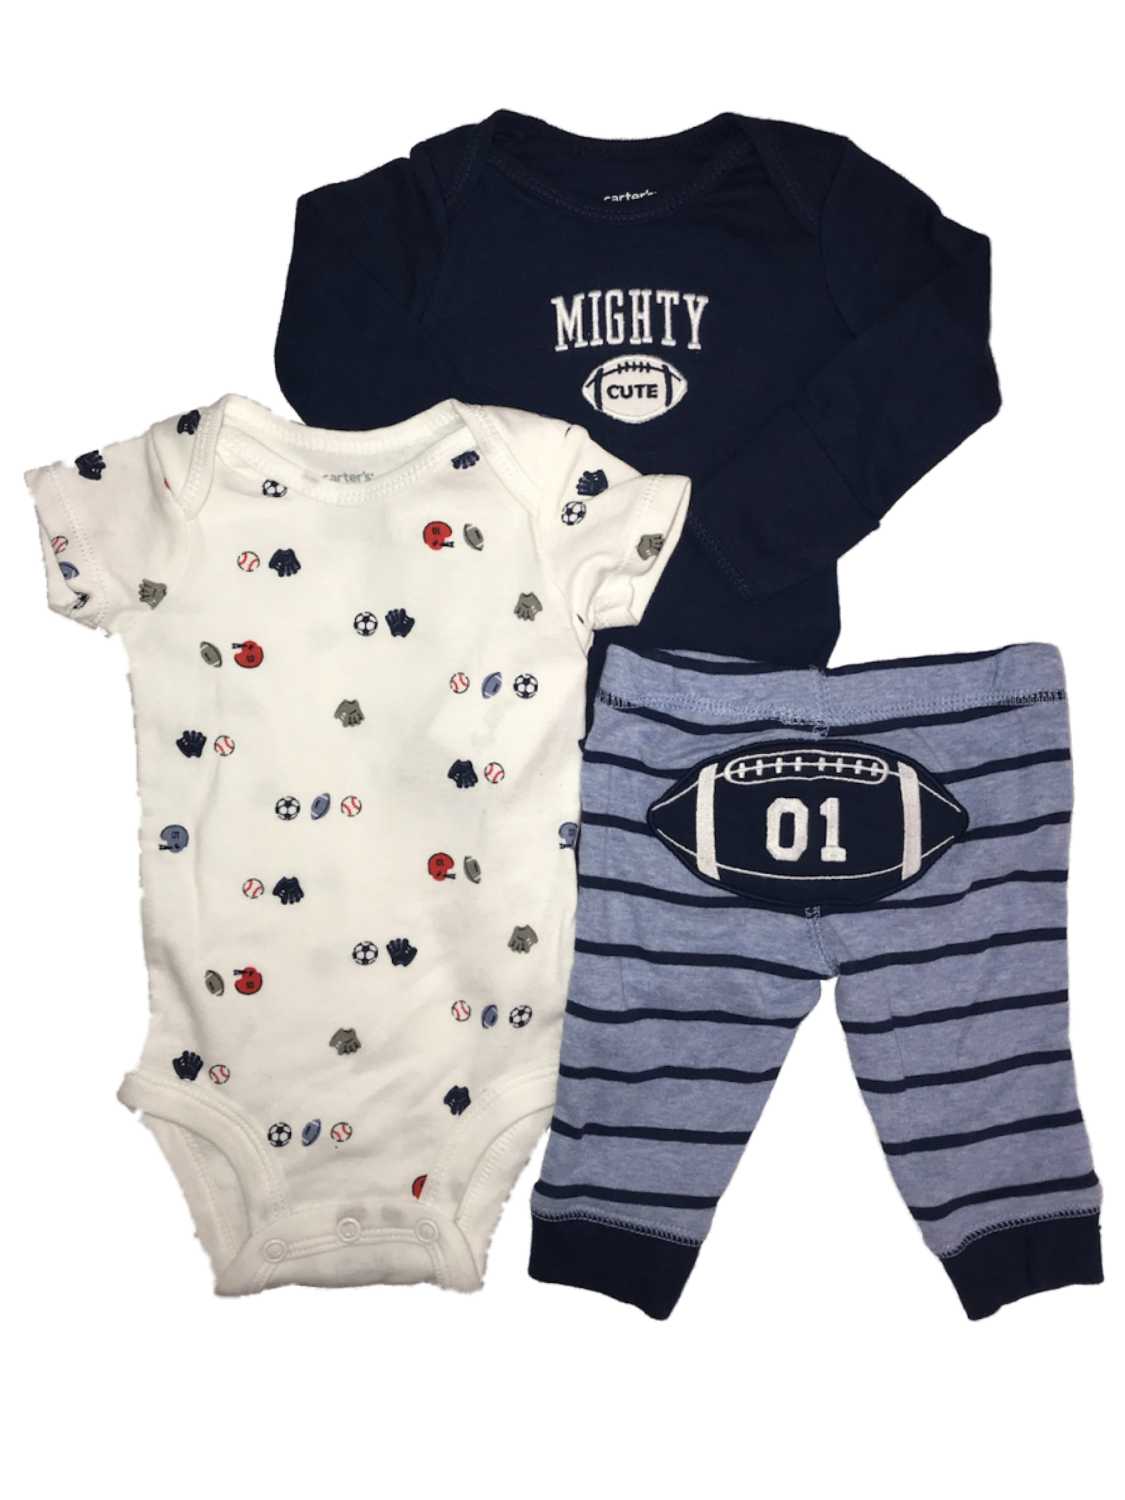 Carter's Carters Infant Boys Football Soccer Baseball Baby Outfits Bodysuit & Sweatpants